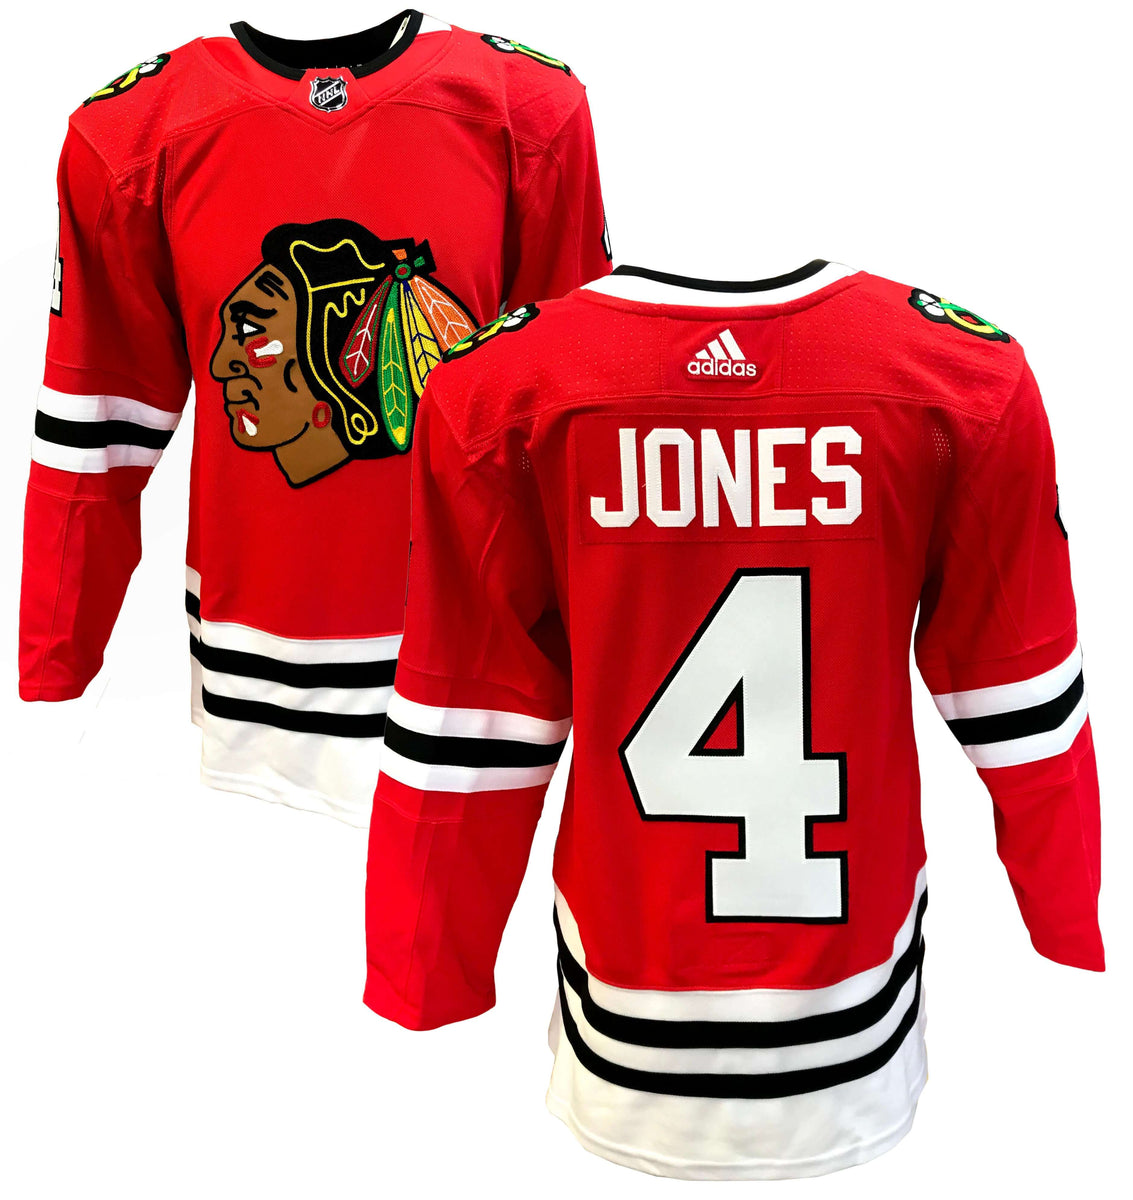 Seth Jones Chicago Blackhawks Unsigned Skates in Red Jersey Photograph